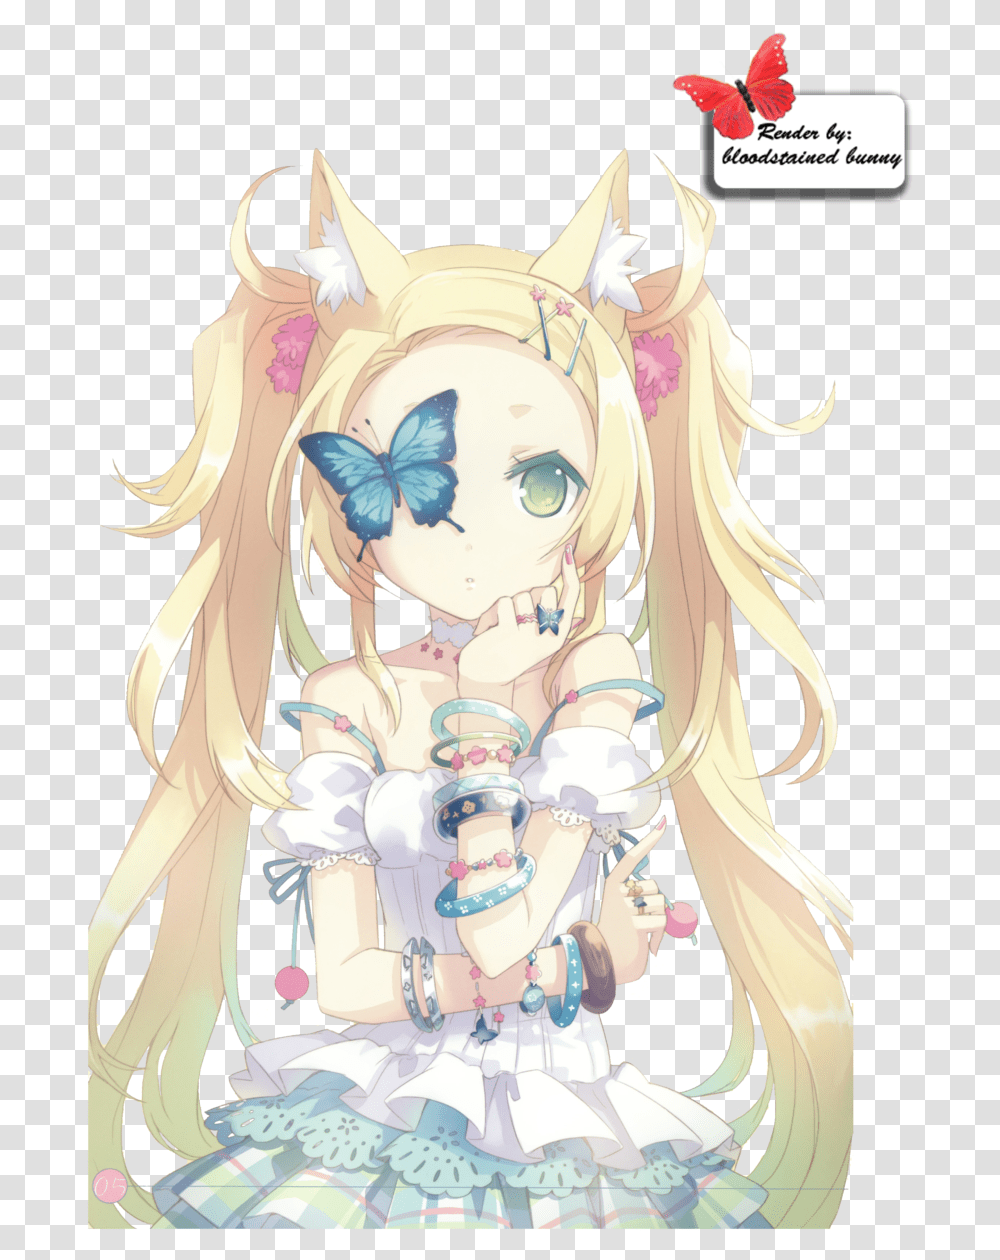 Anime Girl With Blond Hair Blond Anime Girls With Green Eyes, Comics, Book, Manga Transparent Png